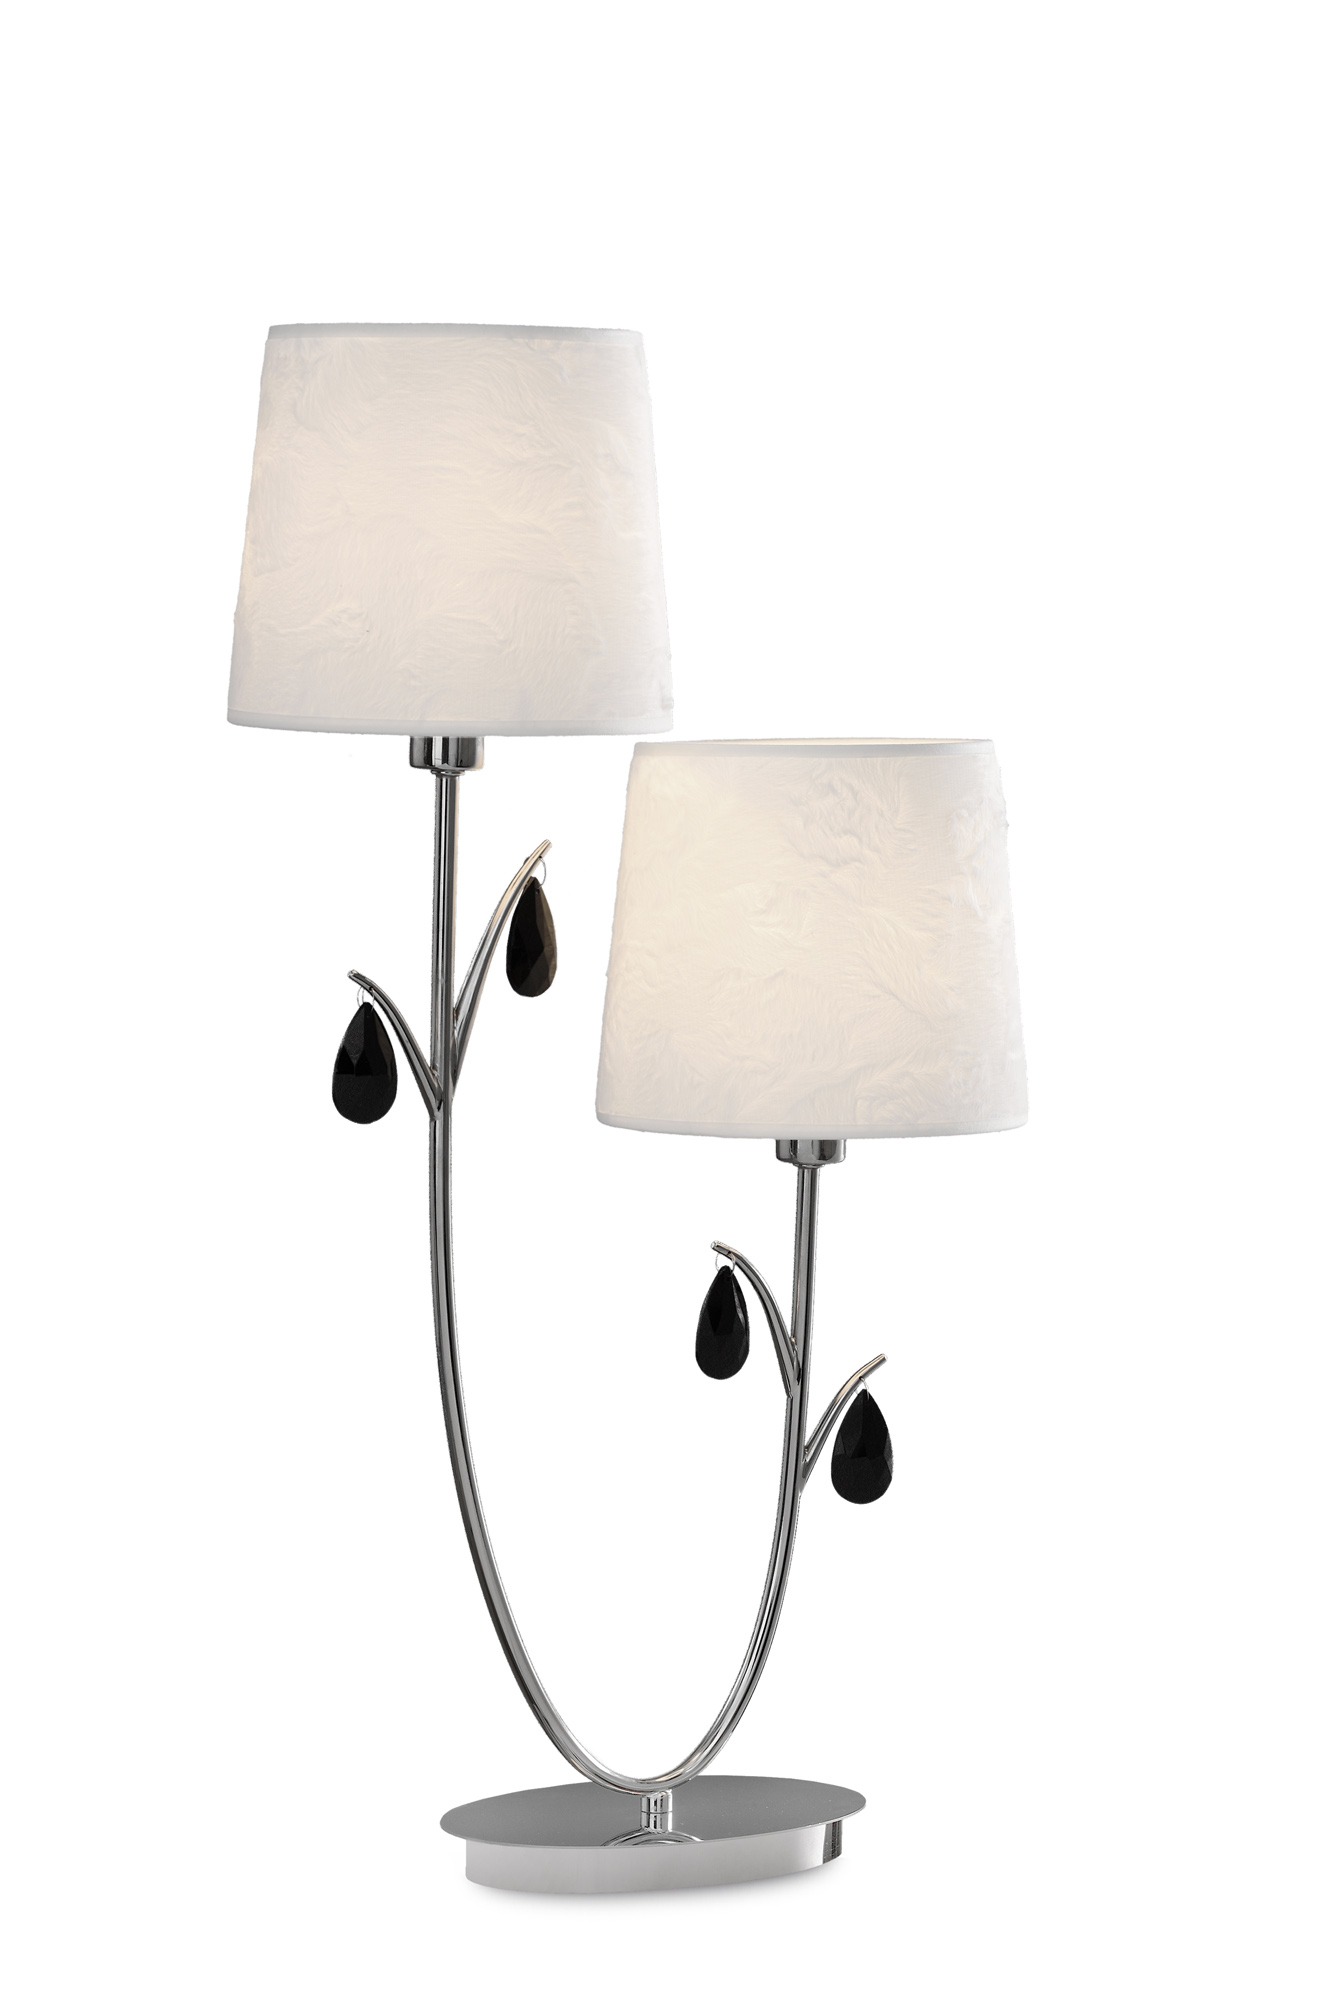 Mantra M6318 Andrea Table Lamp 63cm 2, Droplet Table Lamp Shade